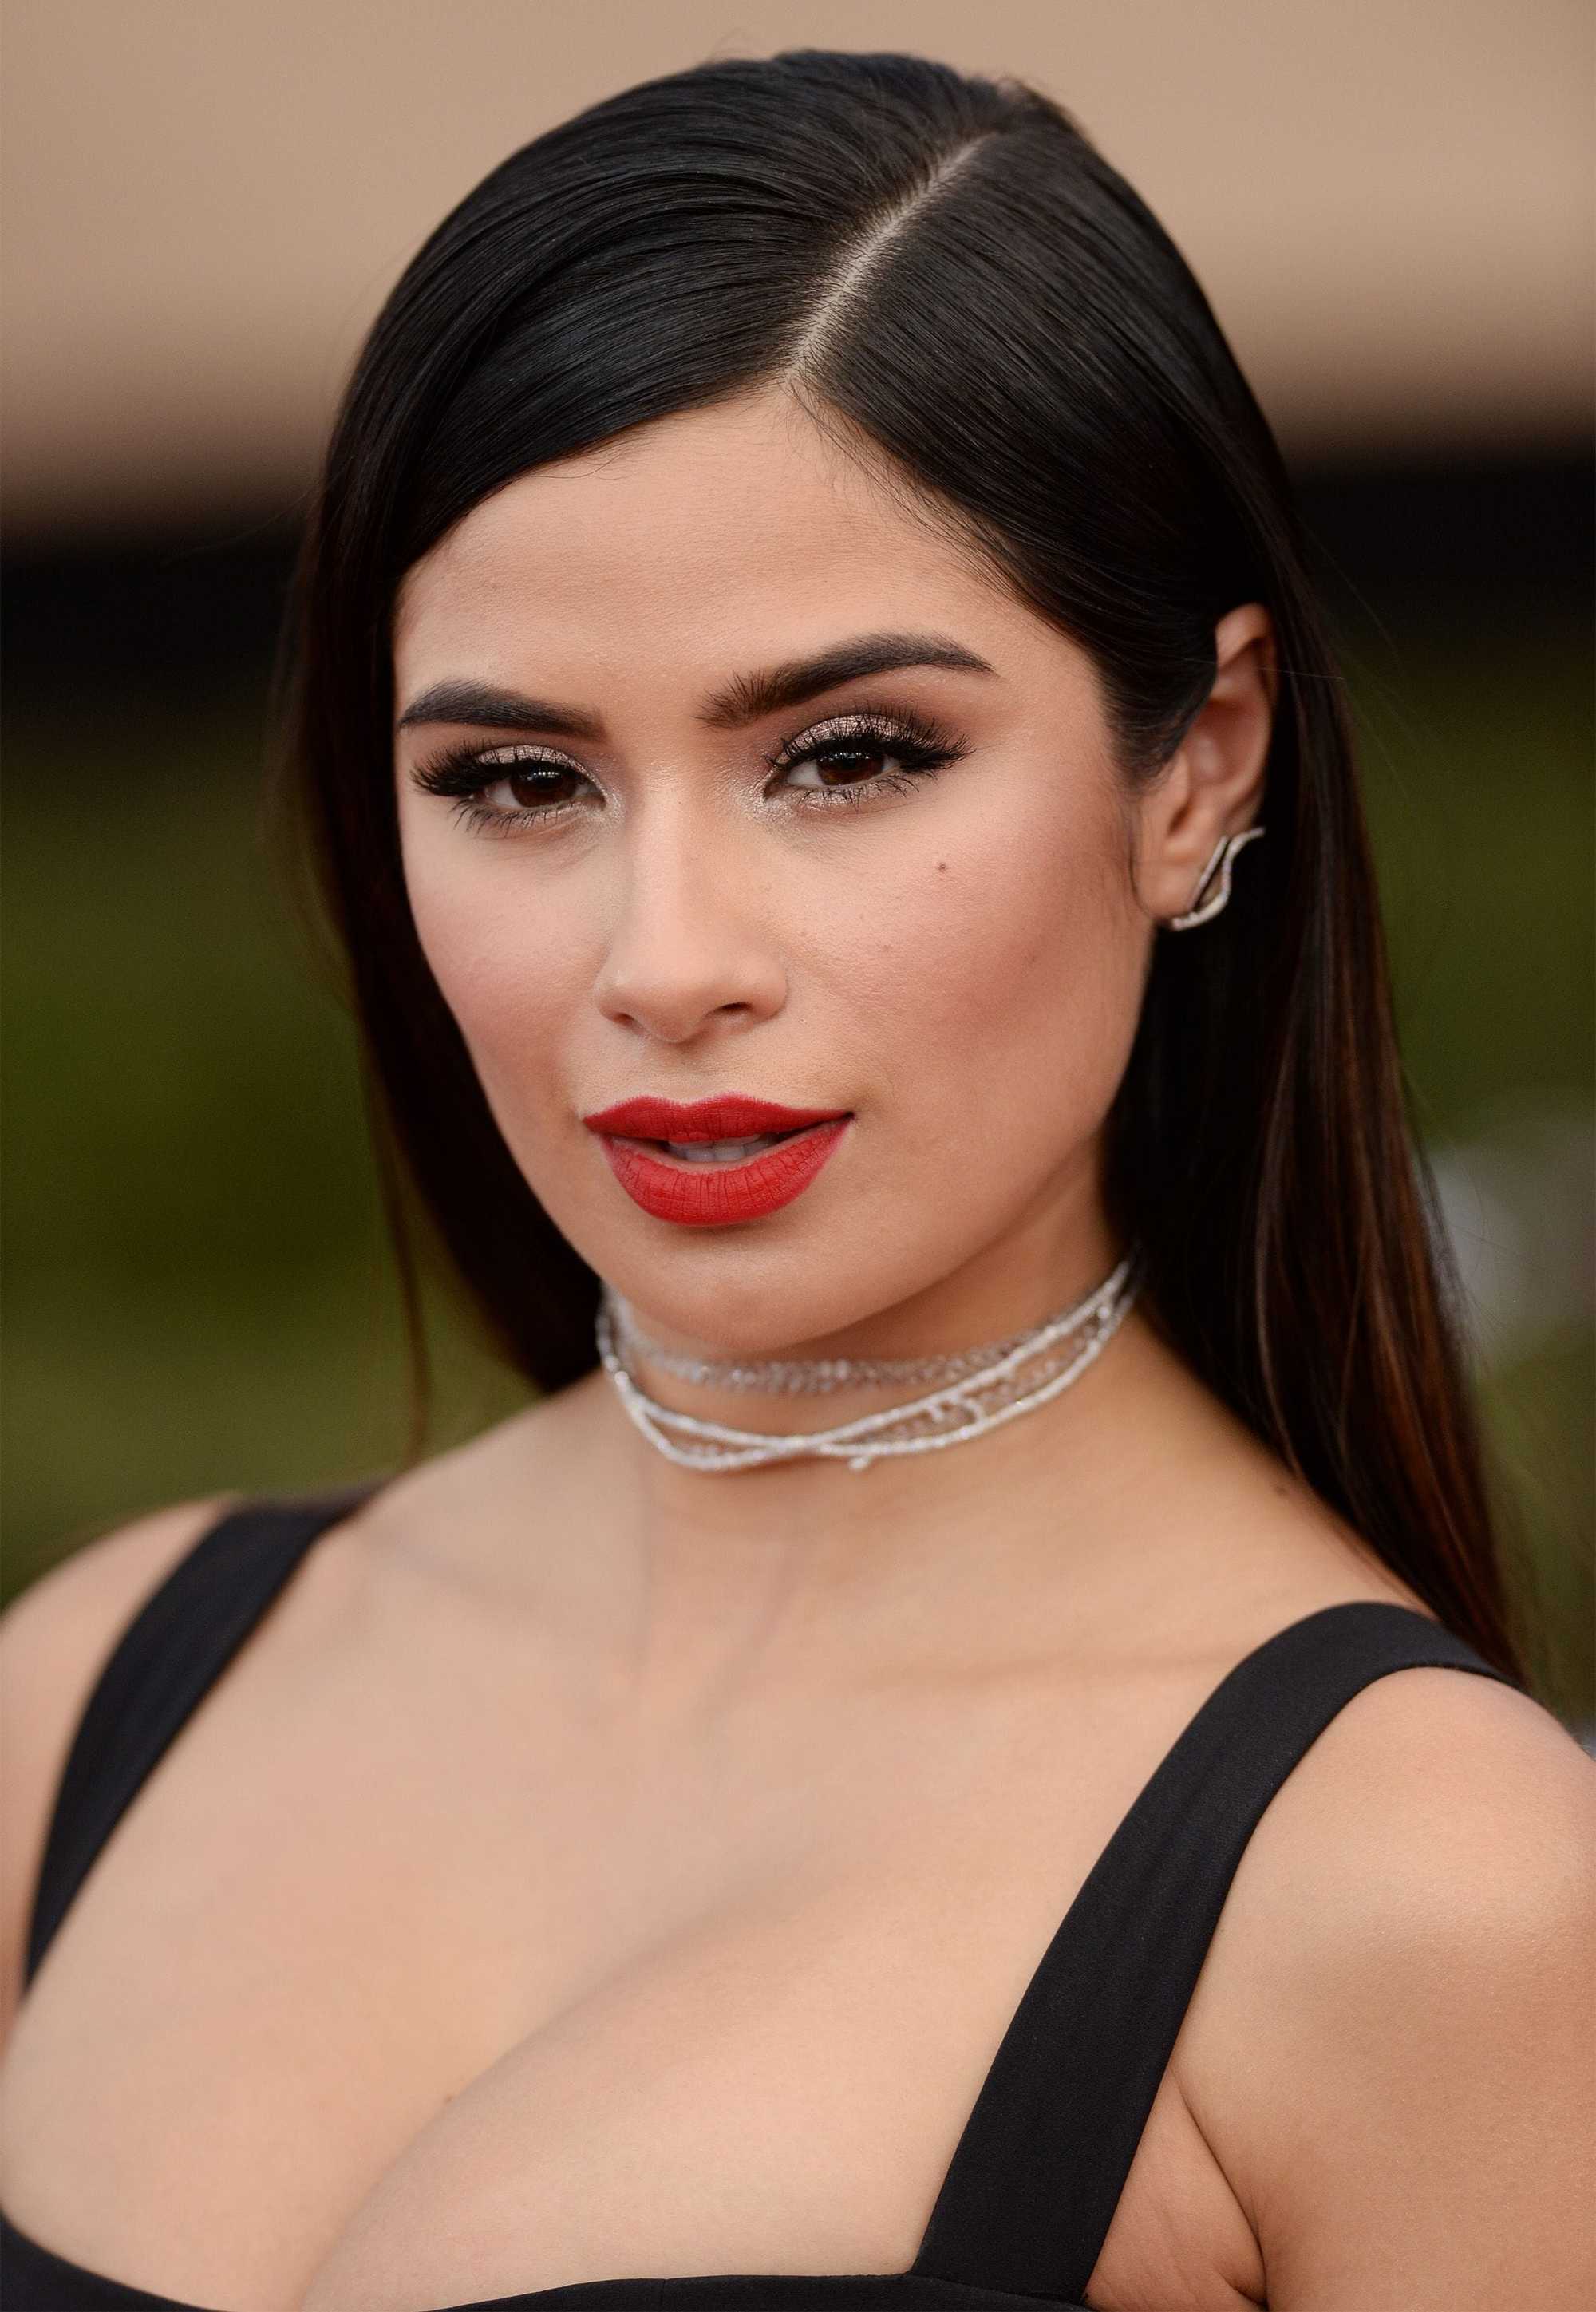 Sexy hairstyles for long hair: Diane Guerrero straight and sleek long brown hair